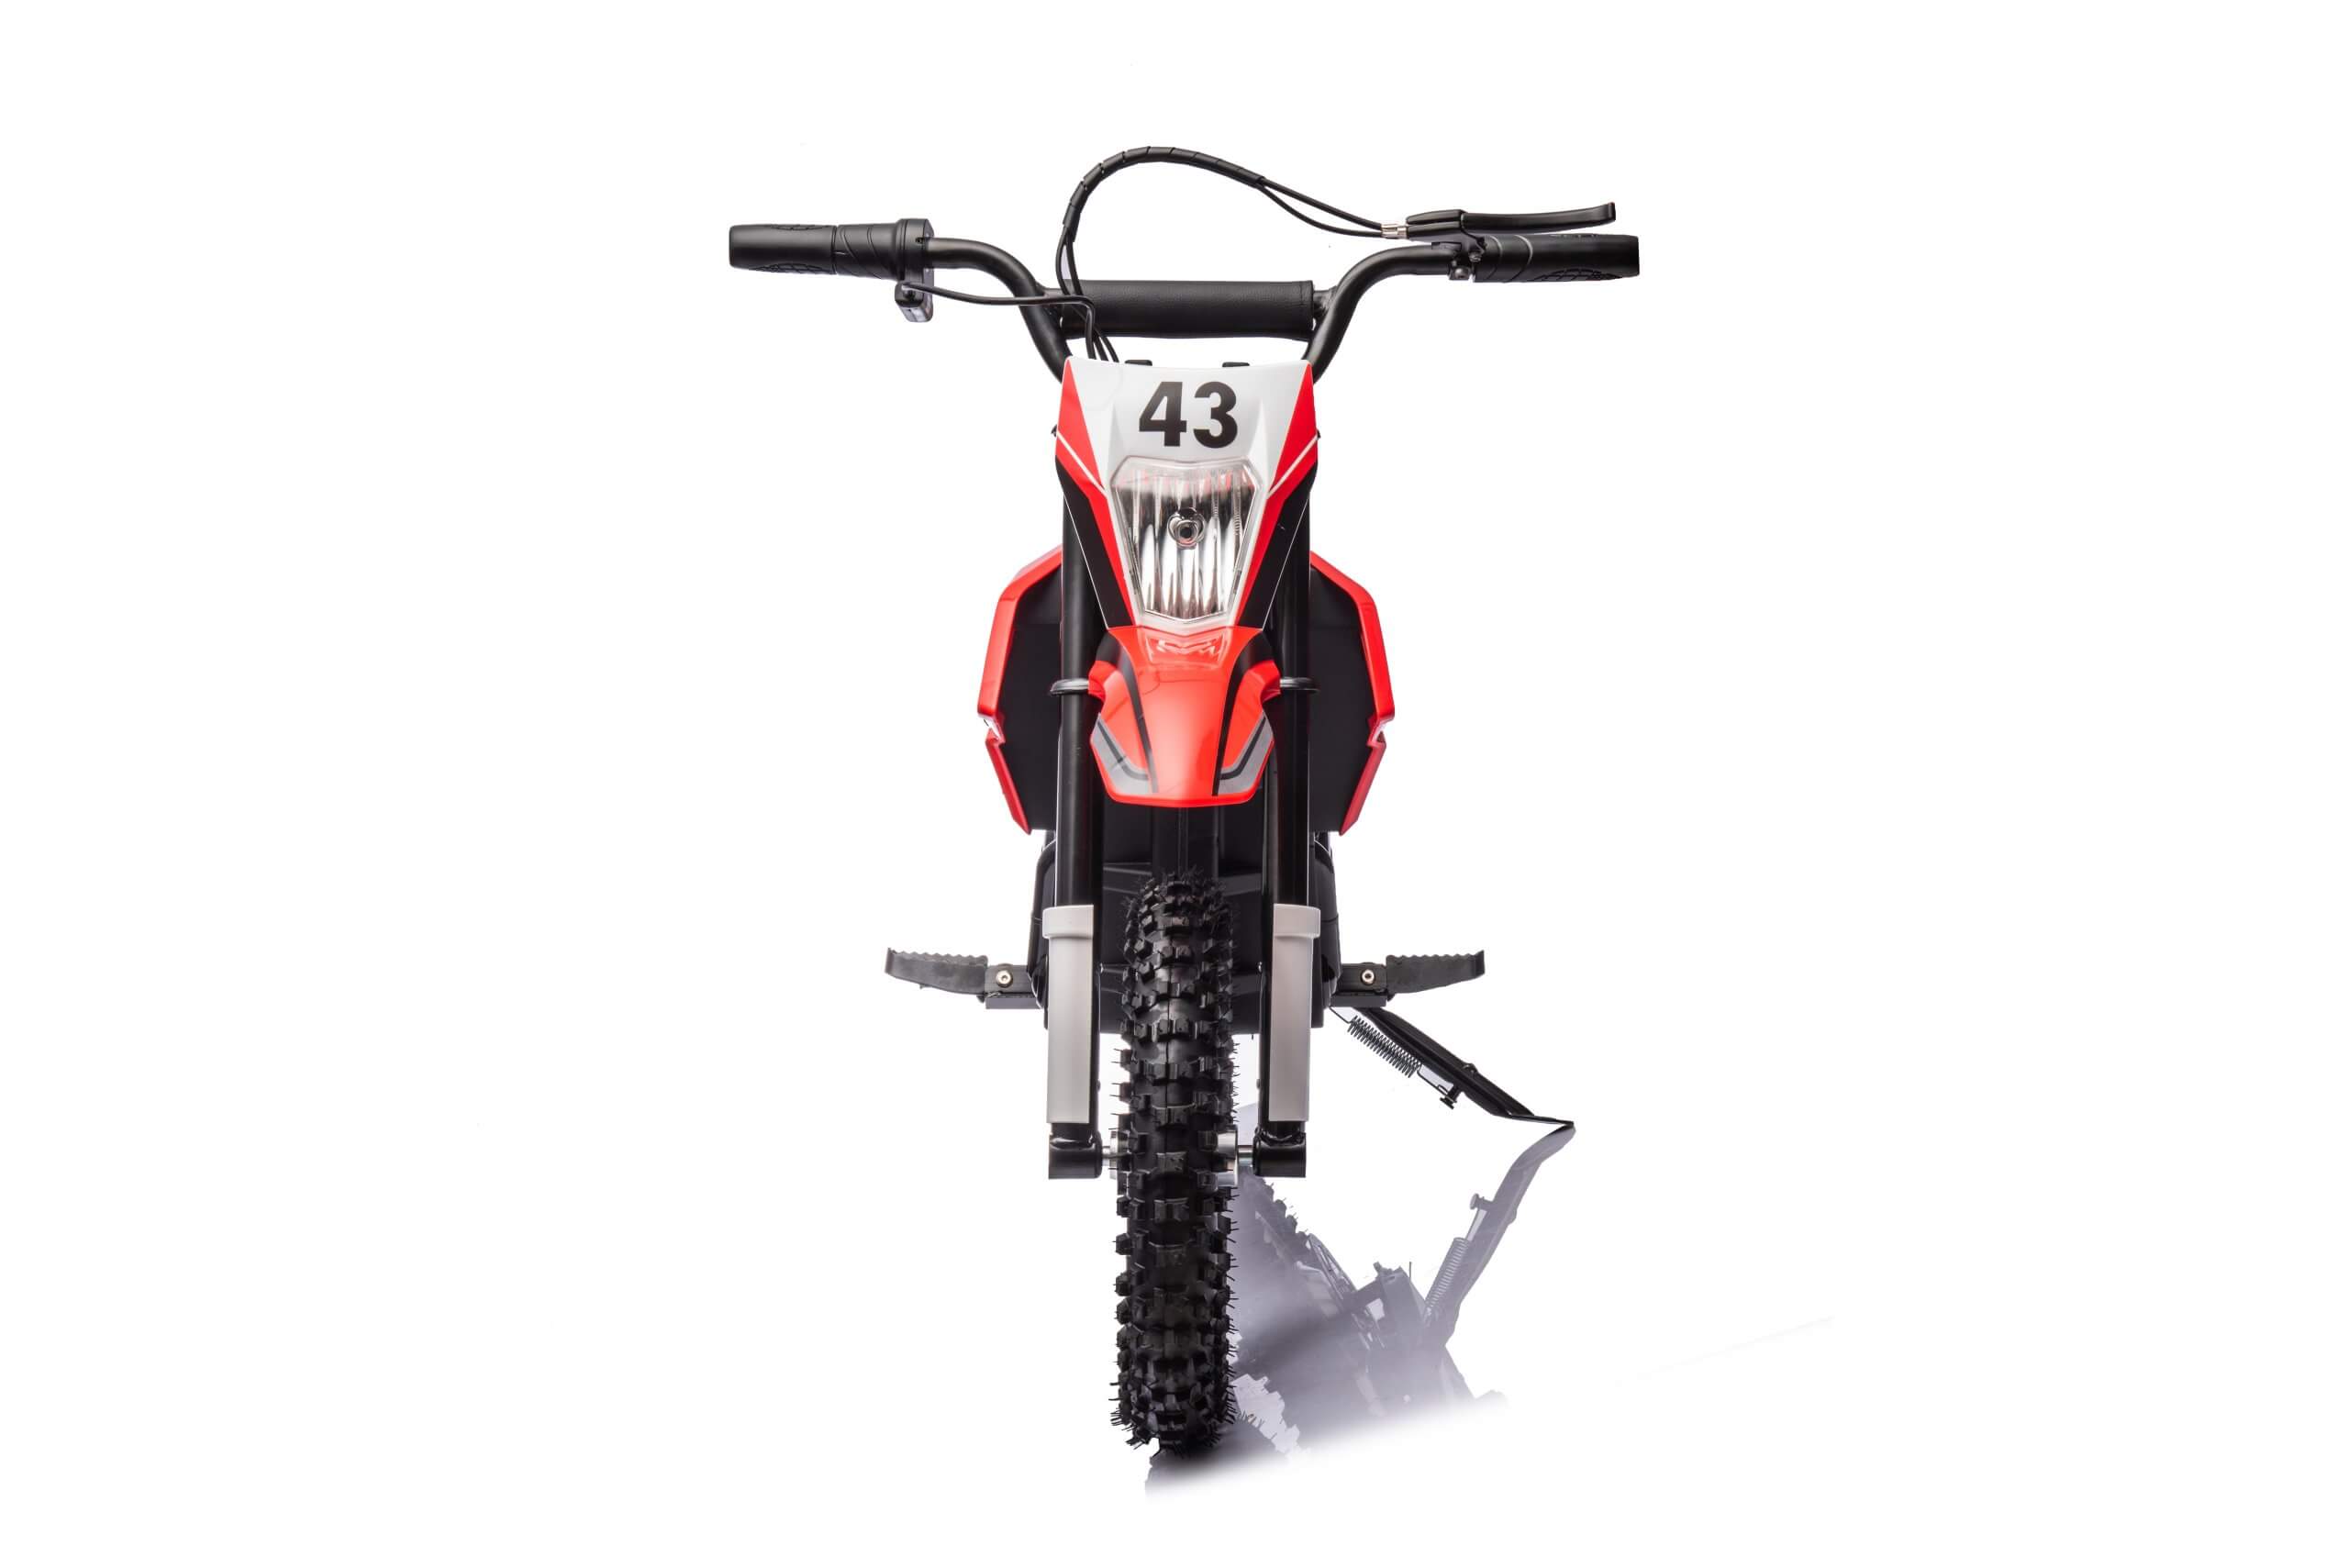 Kidsvip 36V Dirtbike 25Kmh Red2023 10 02 At 11.27.59 Am 2 Scaled 28 New Cars